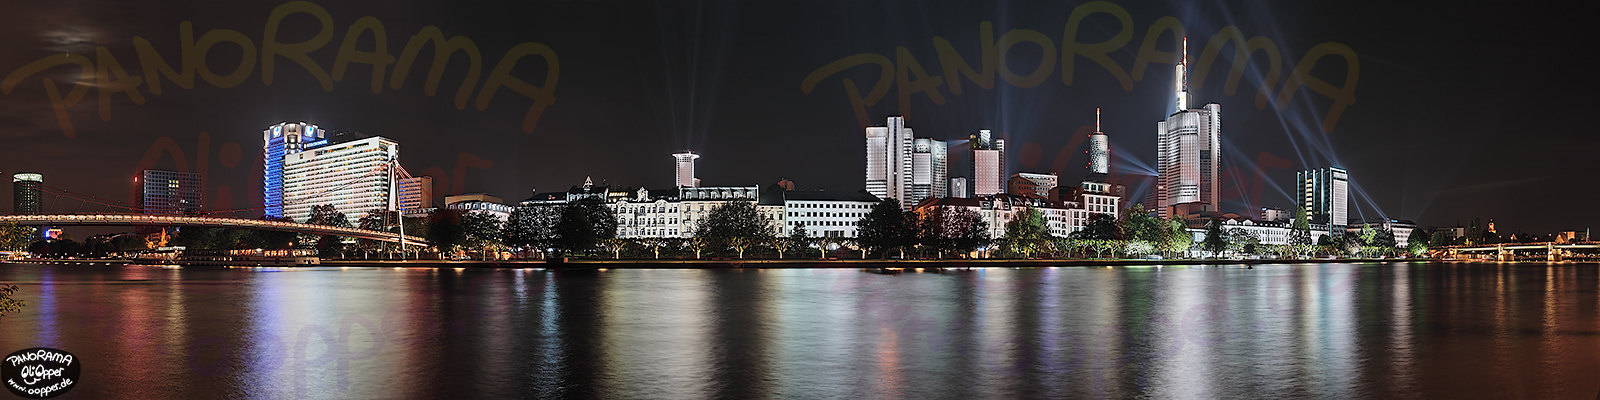 Panorama Frankfurt - Sky Arena - p122 - (c) by Oliver Opper